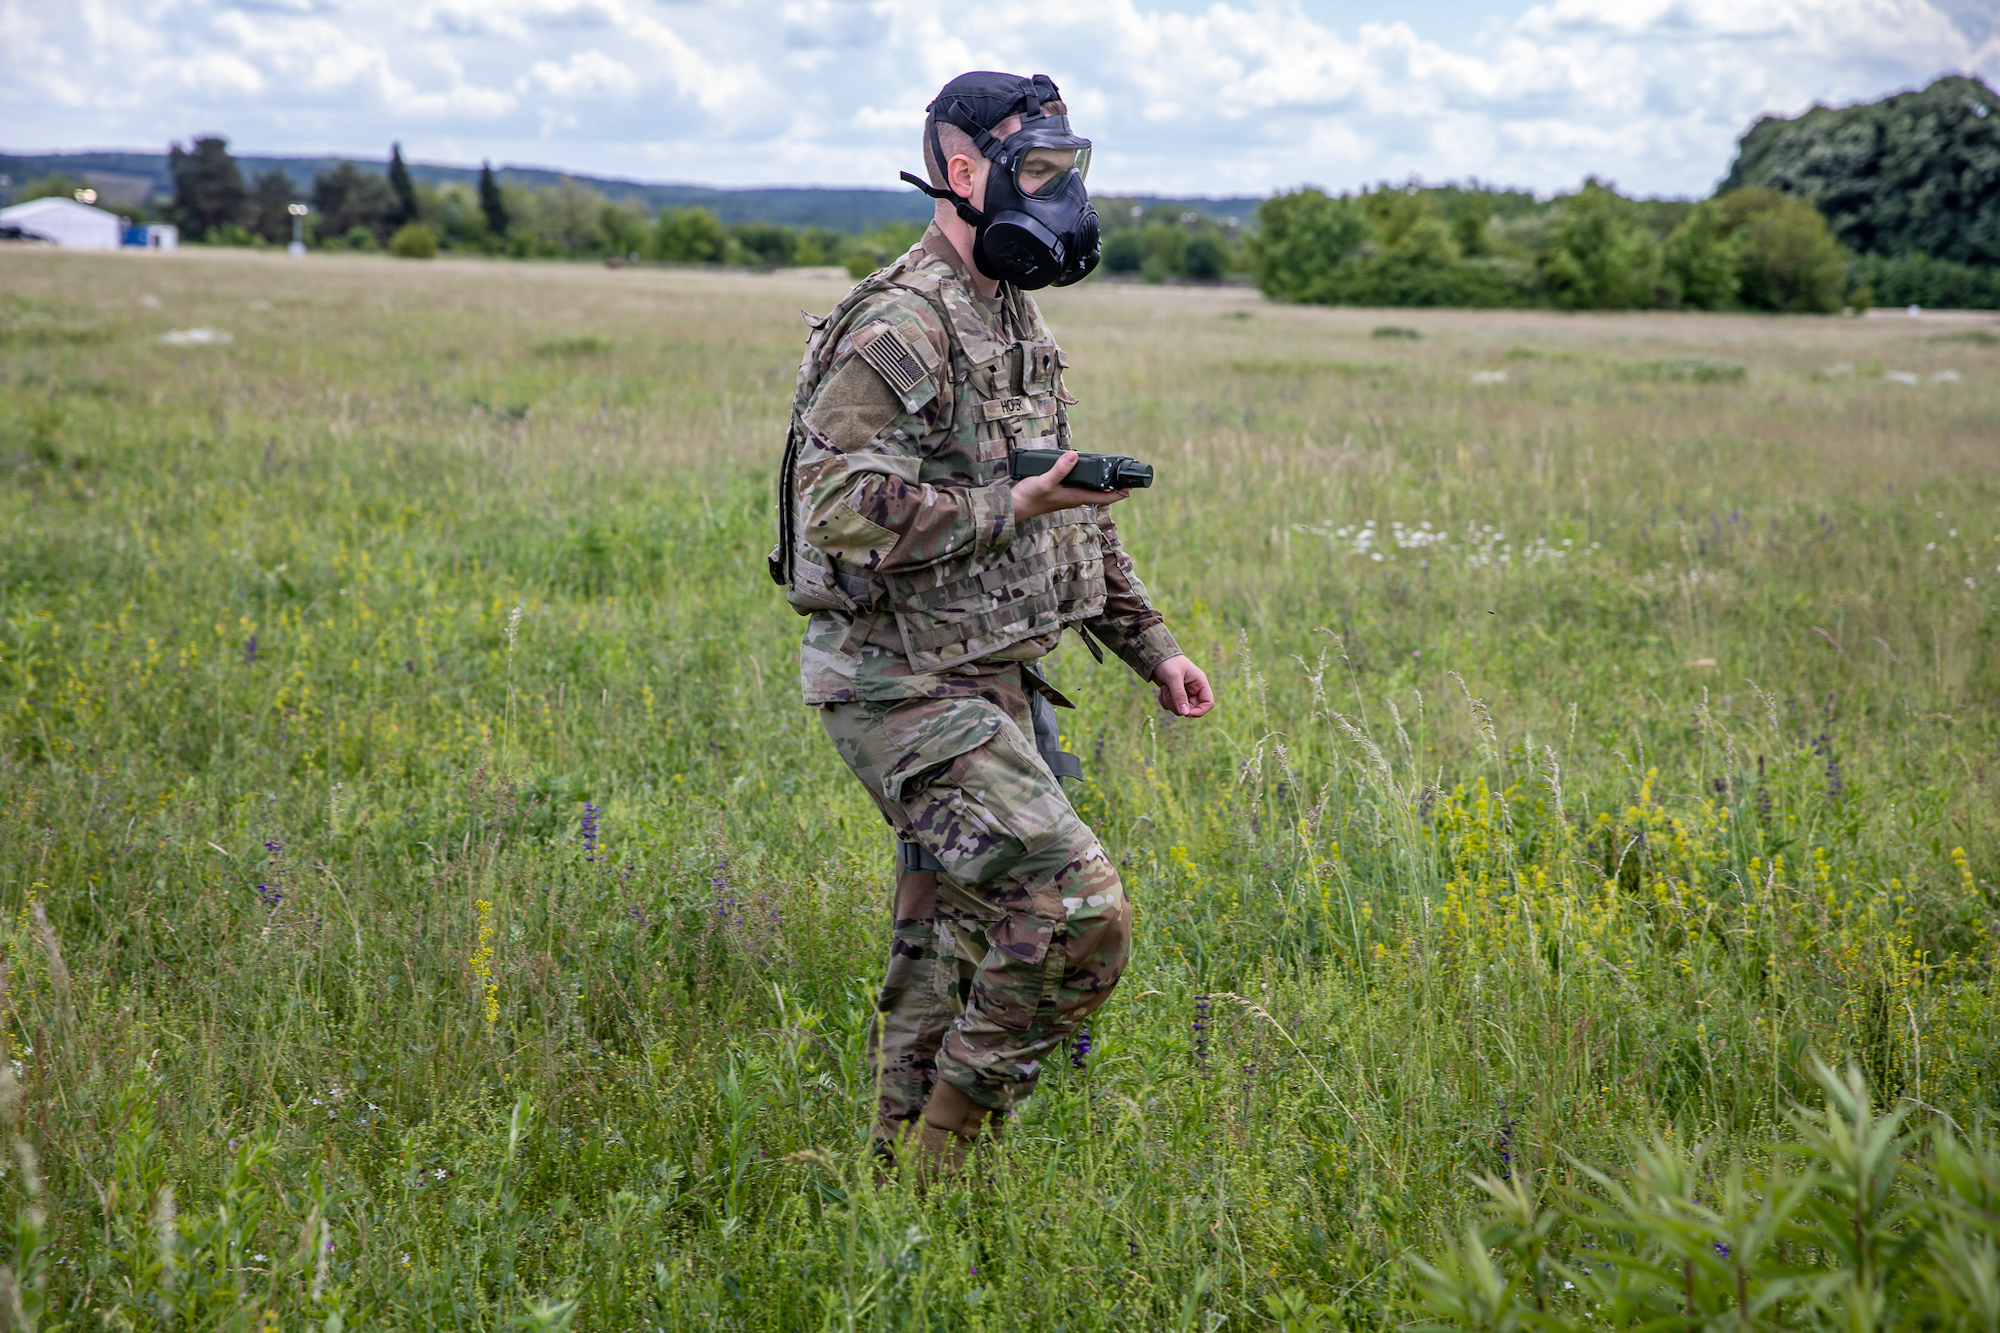 Wearable sensors may one day sniff out chemical weapons for soldiers